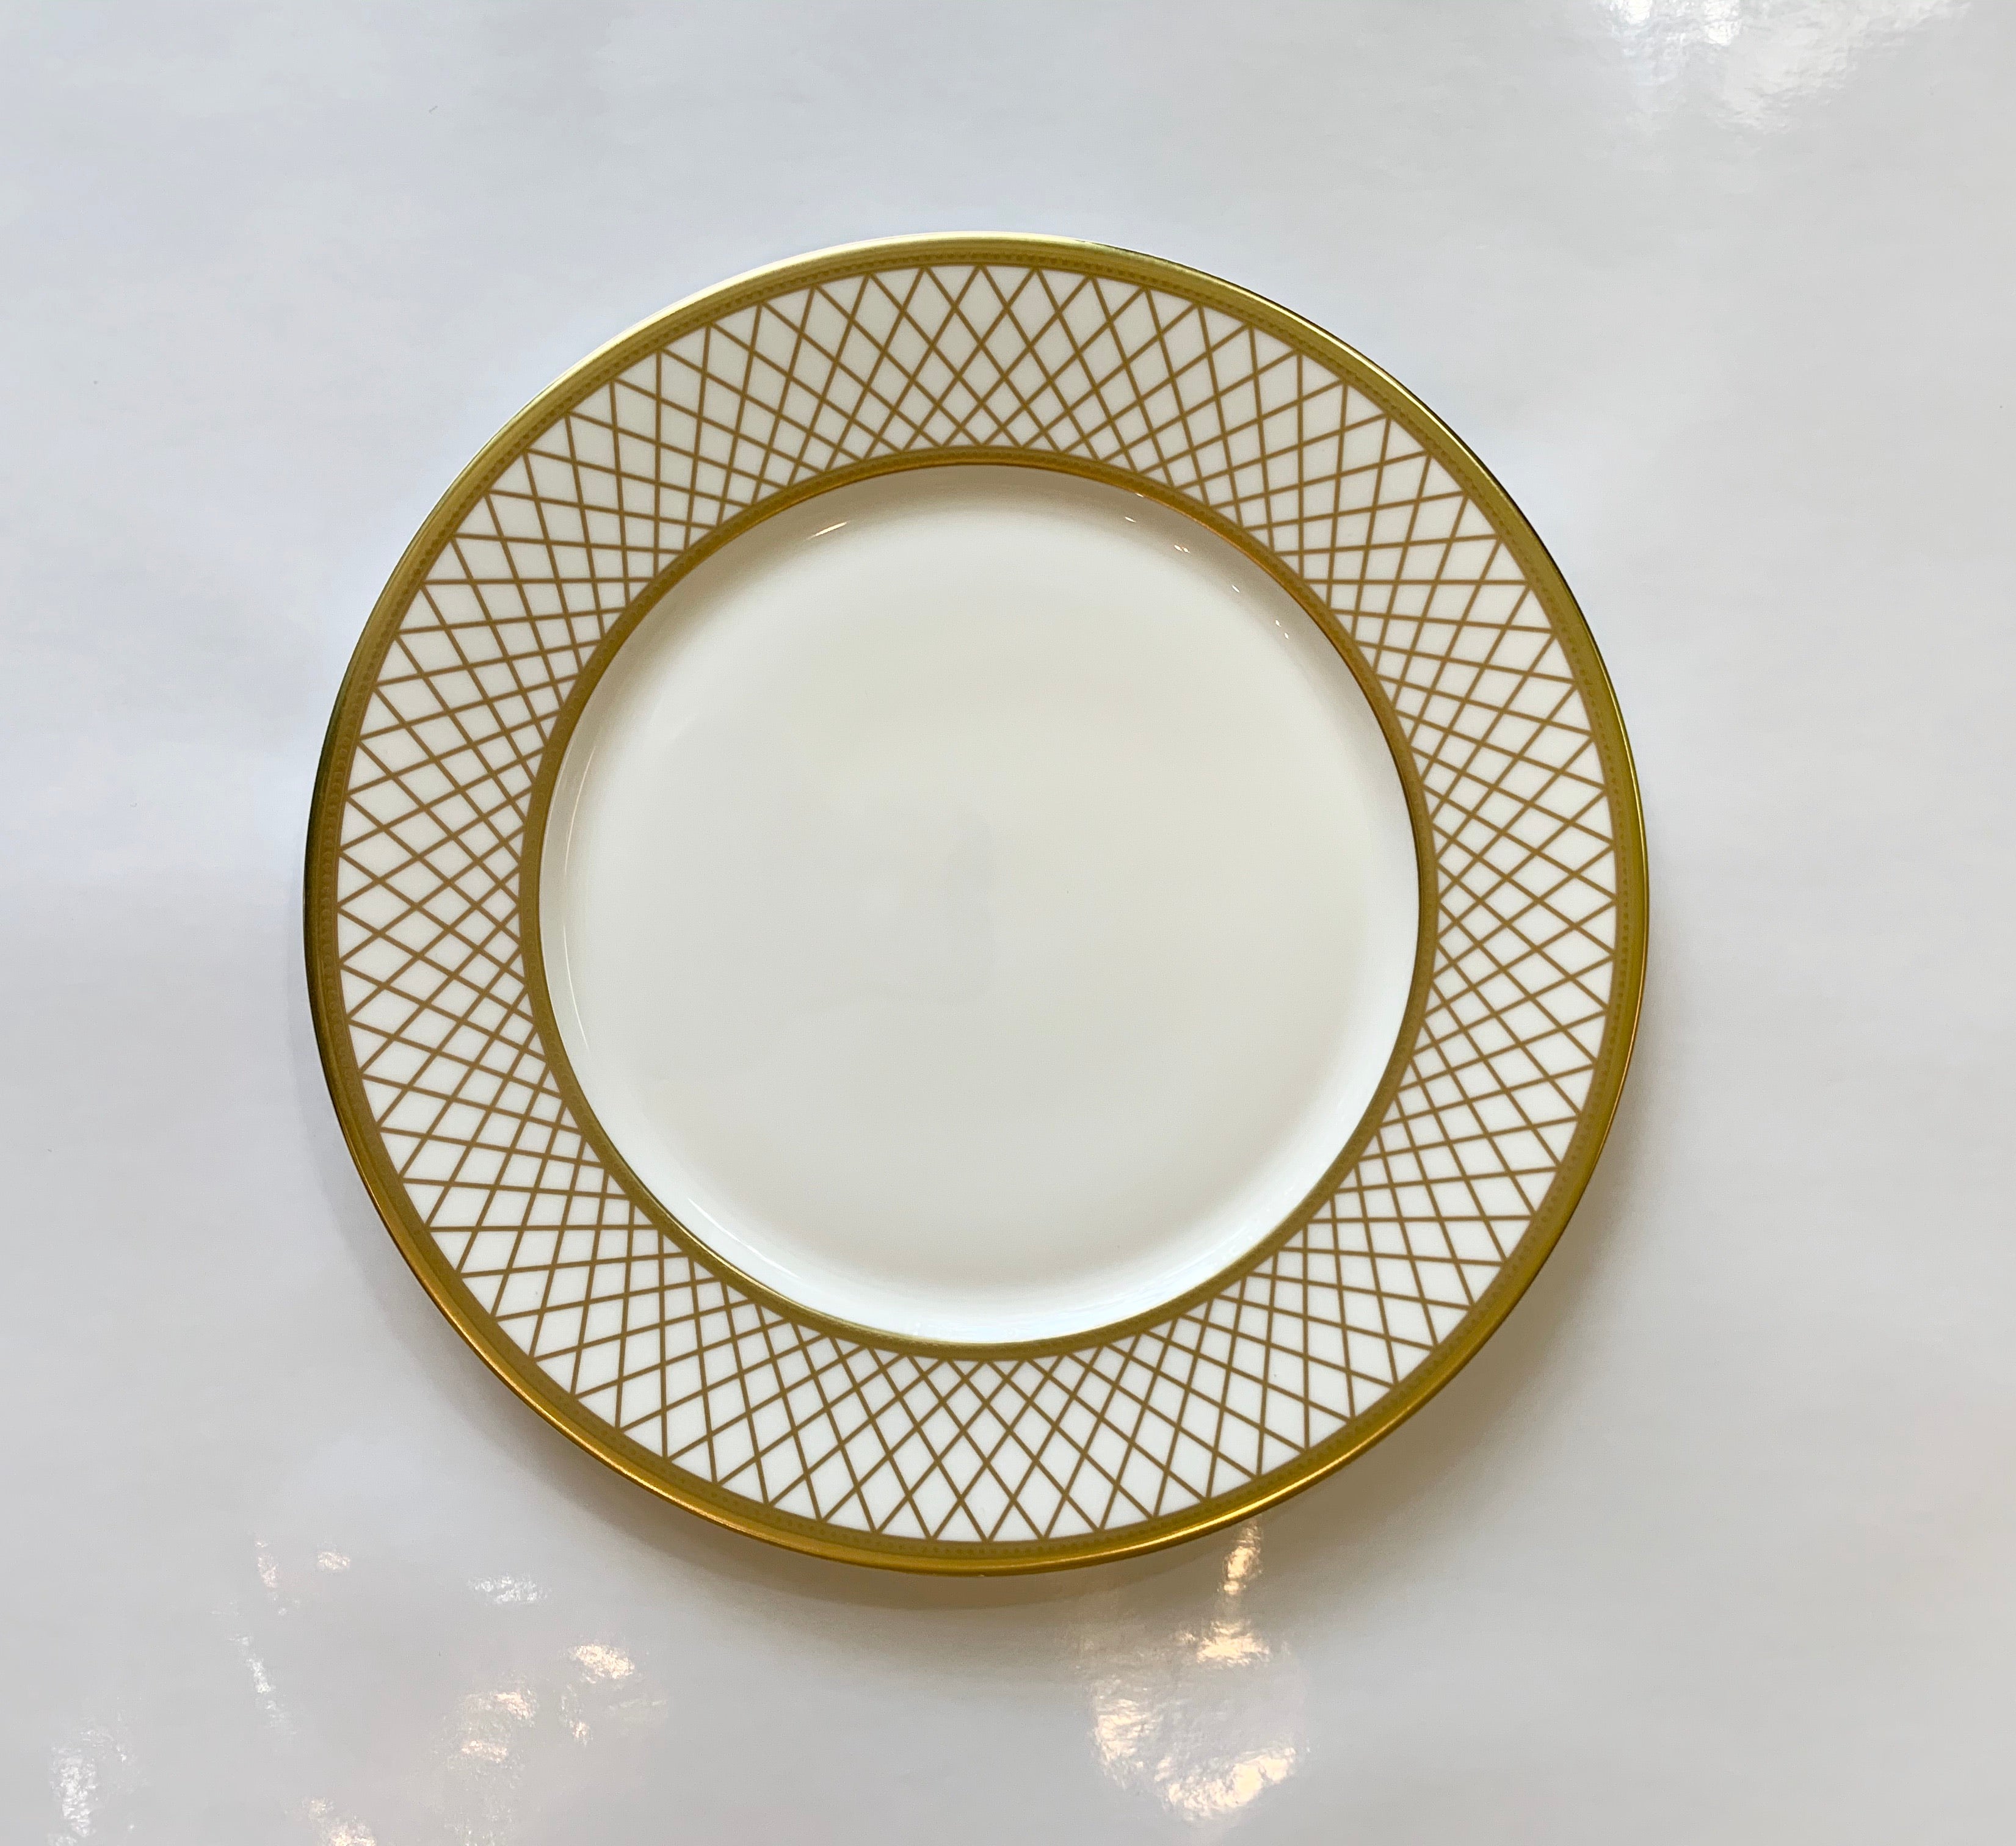 Majestic White Dinner Plate